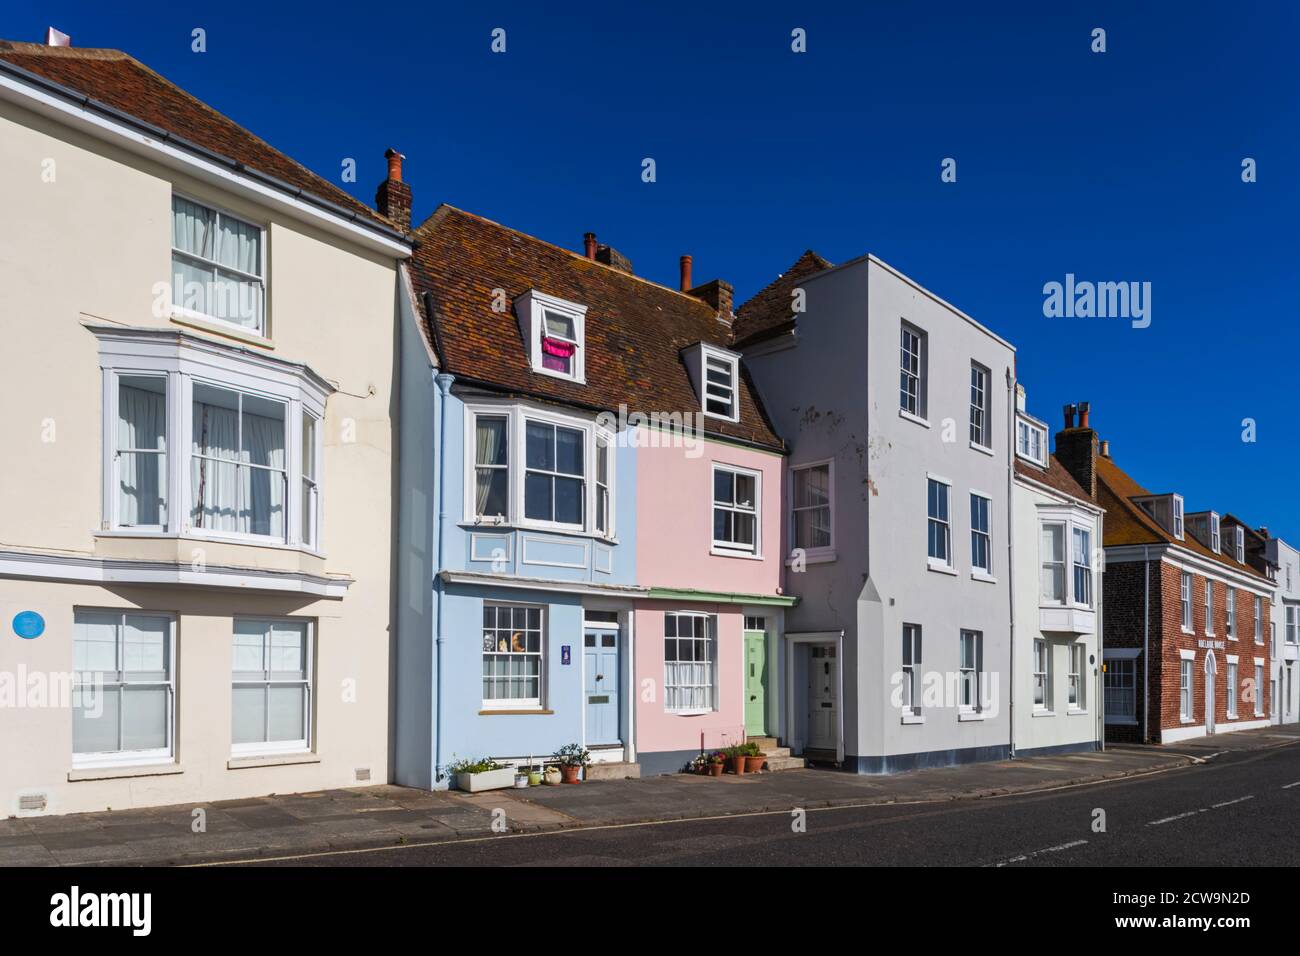 England, Kent, Deal, Residential Street Scene with Colourful Housing Stock Photo